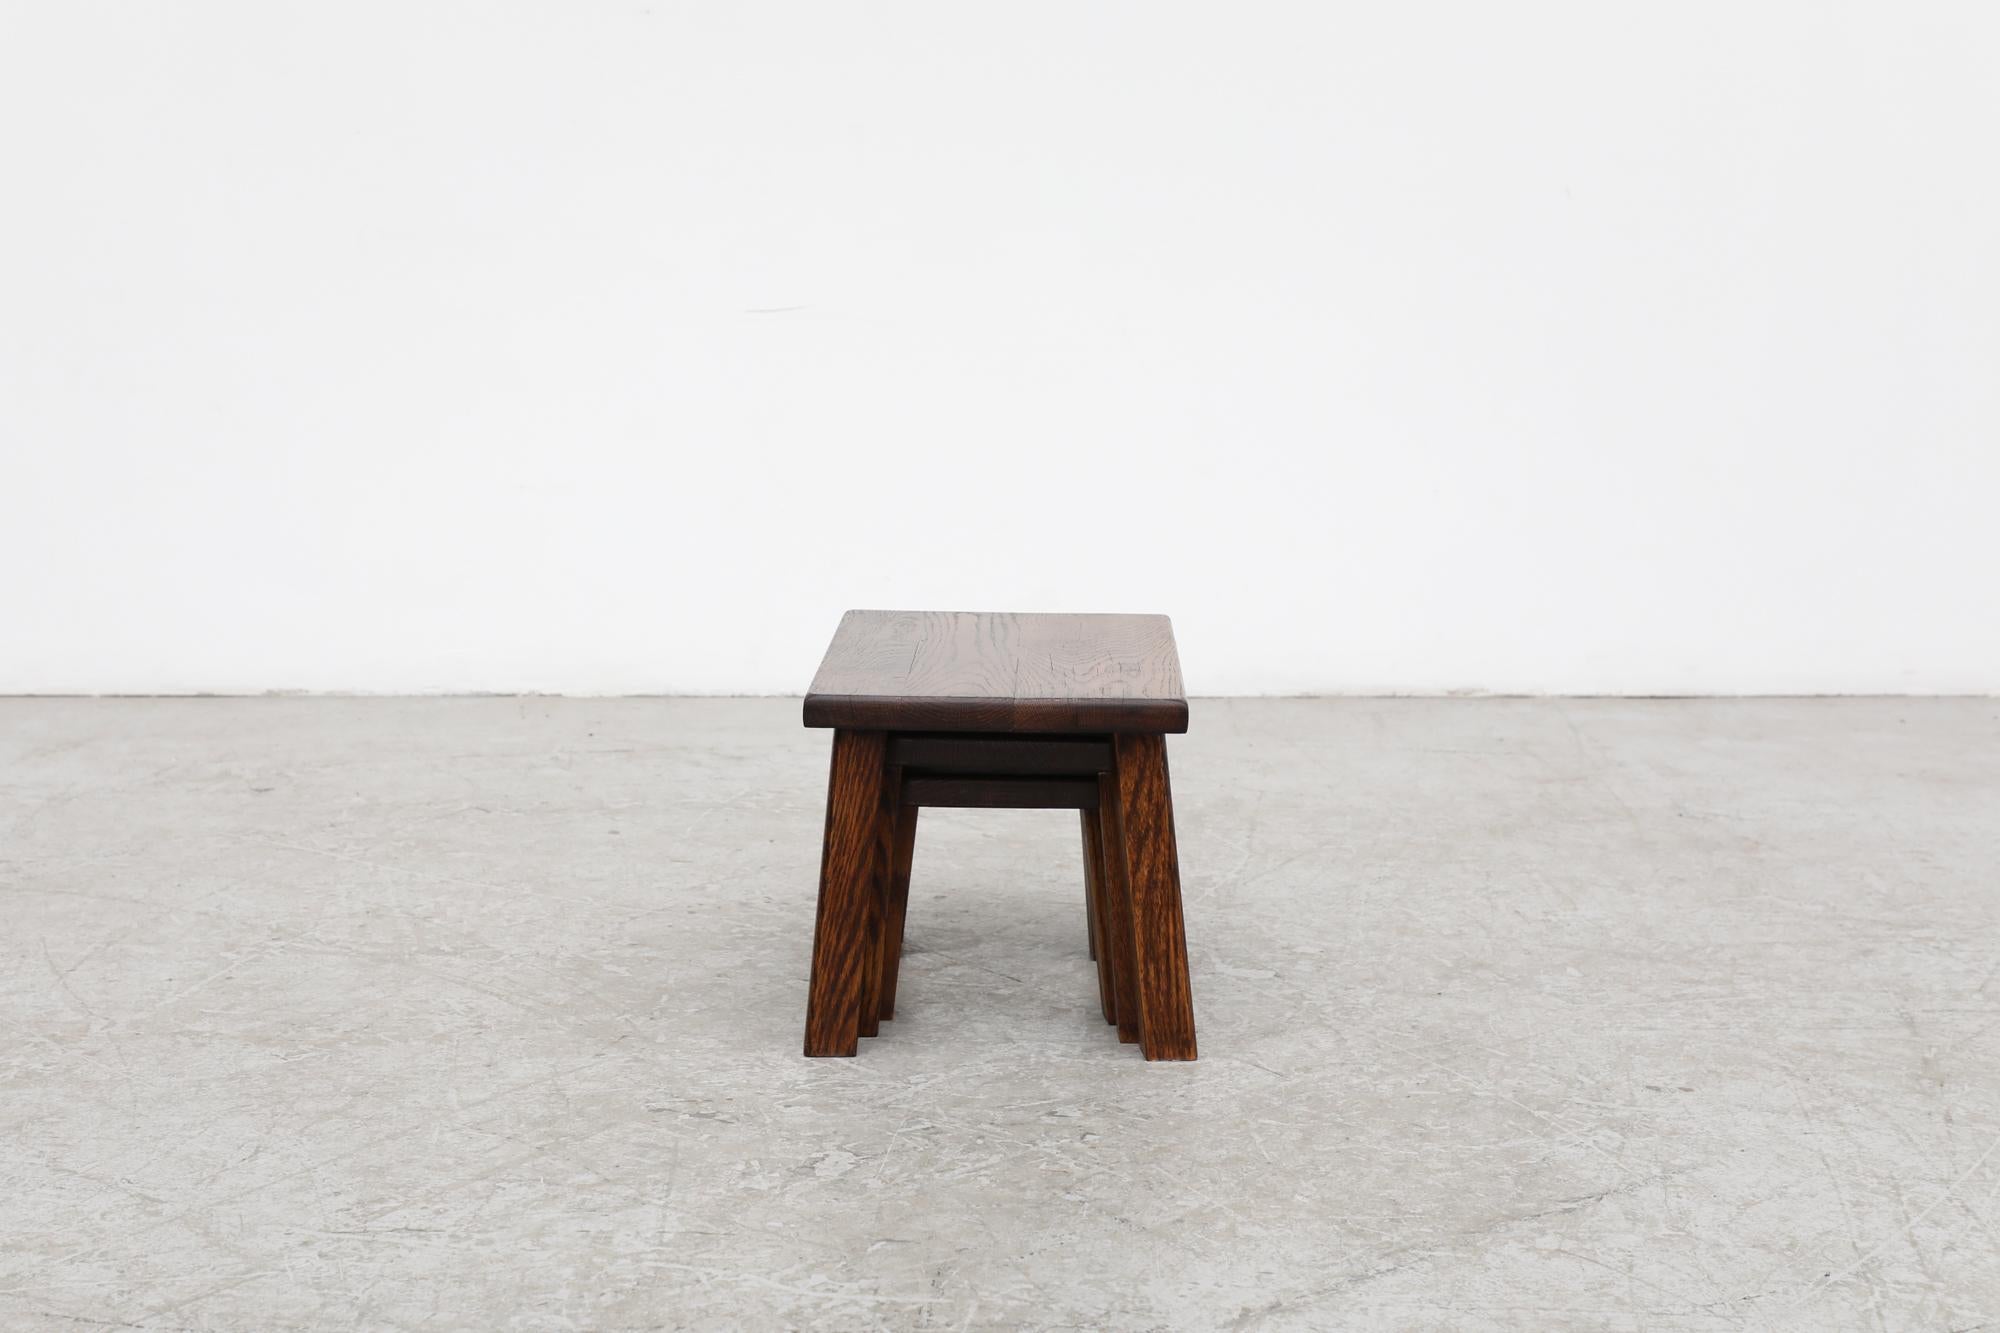 Pierre Chapo Inspired Dark Oak Brutalist Nesting Tables w/ Thick Angled Legs For Sale 1